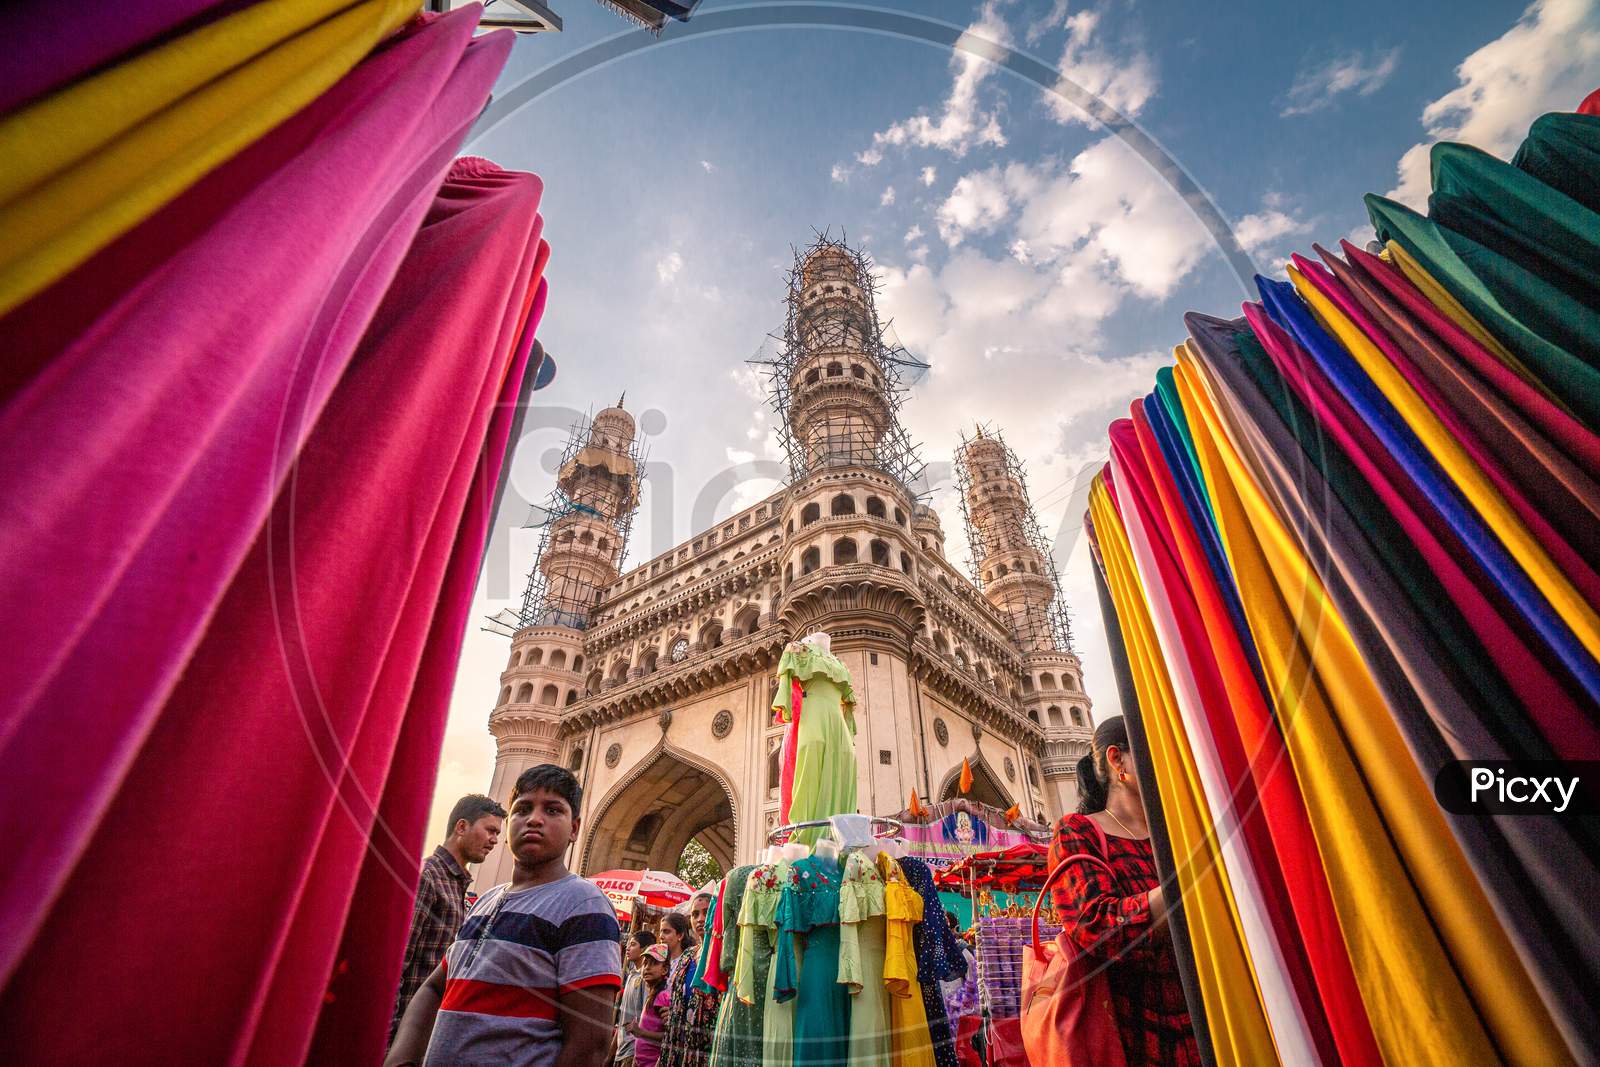 View of Charminar by the bazaar